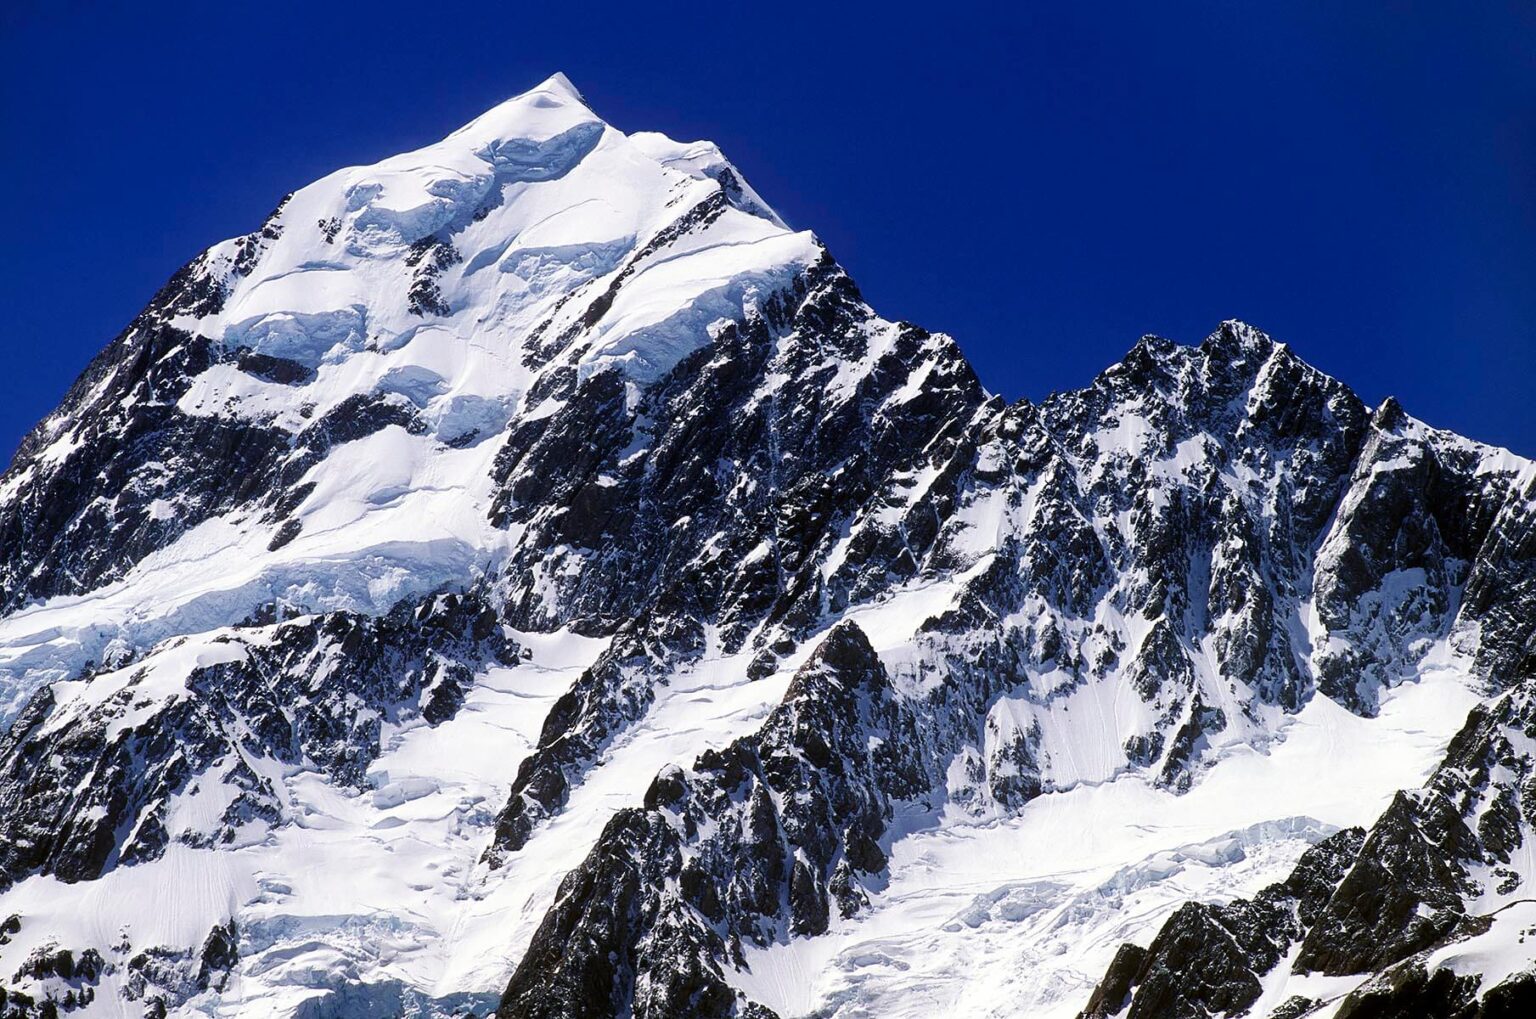 MT COOK, New Zealand's highest peak at 12,246 feet, is the crowning glory of the SOUTHERN ALPS - MT COOK NP